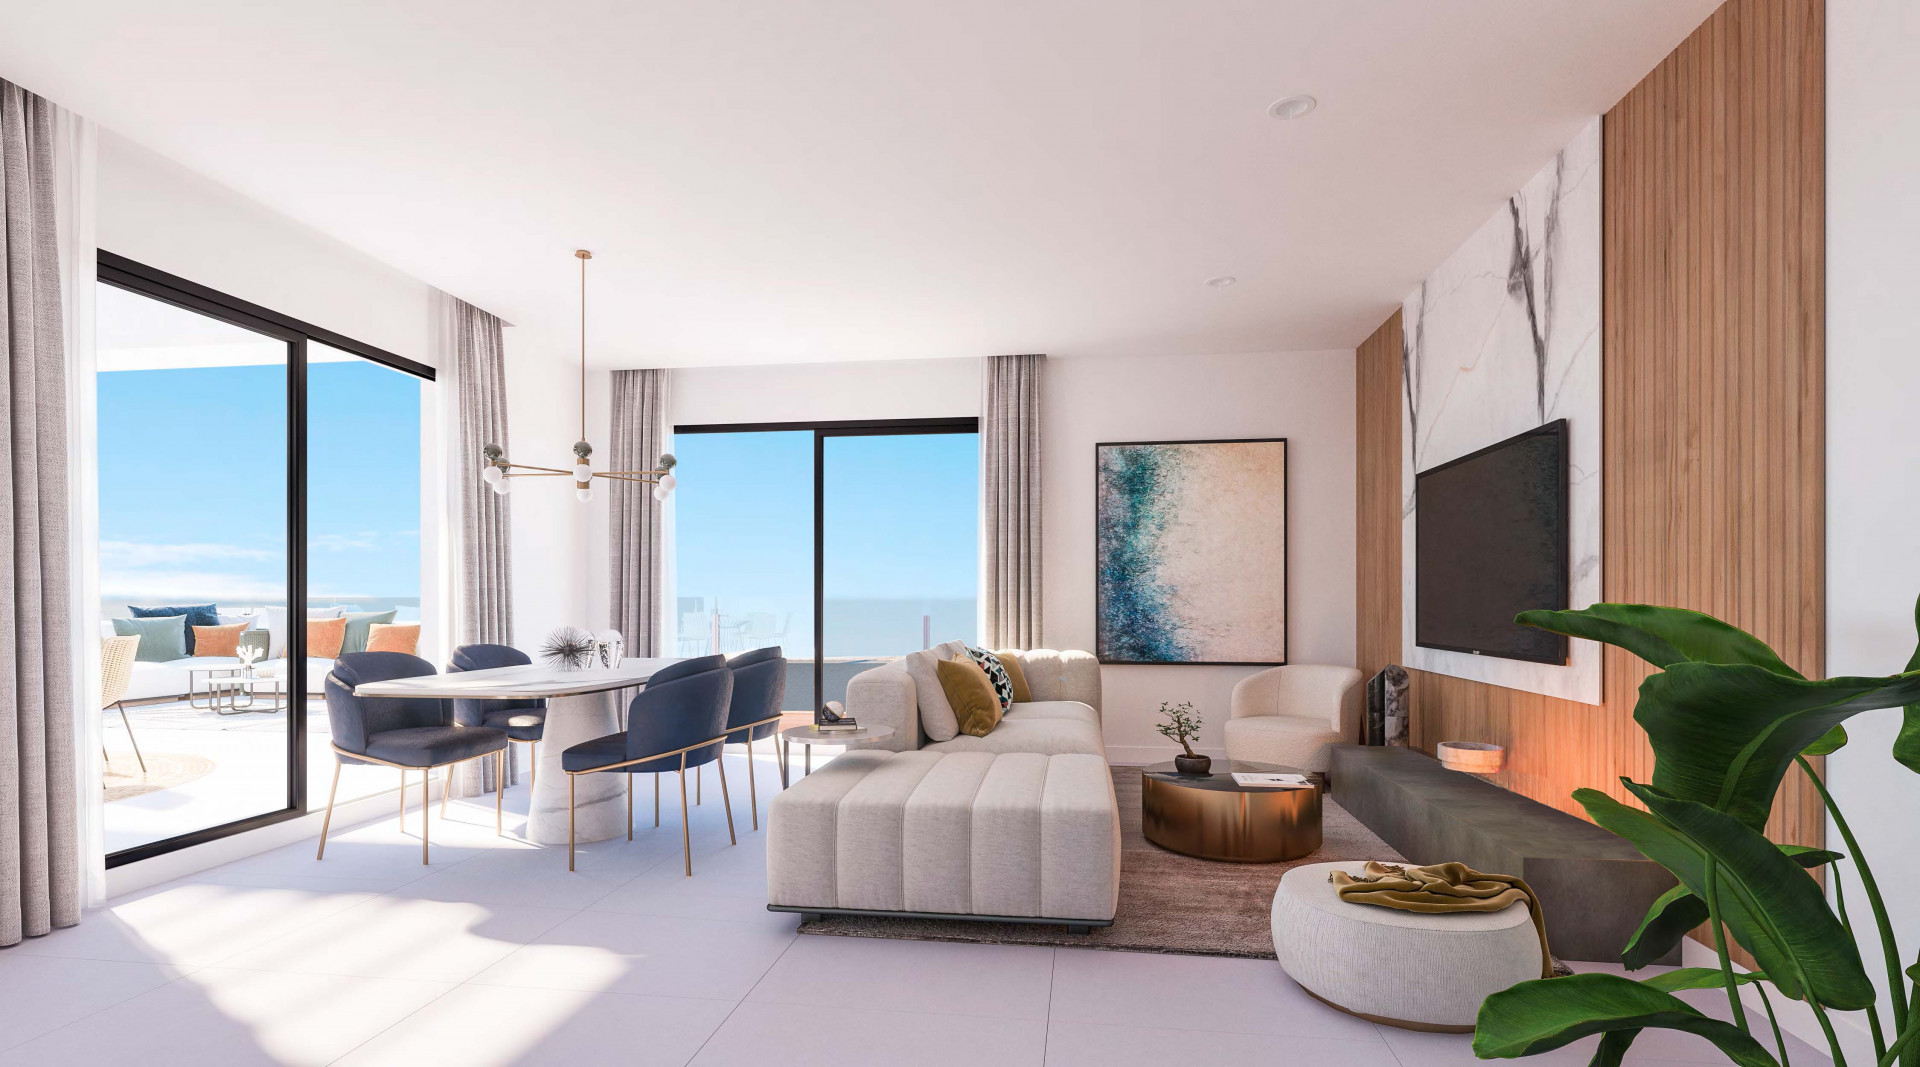 Mane Residences: Exclusive residential complex of flats and townhouses with panoramic sea views in Benalmádena. | Image 11